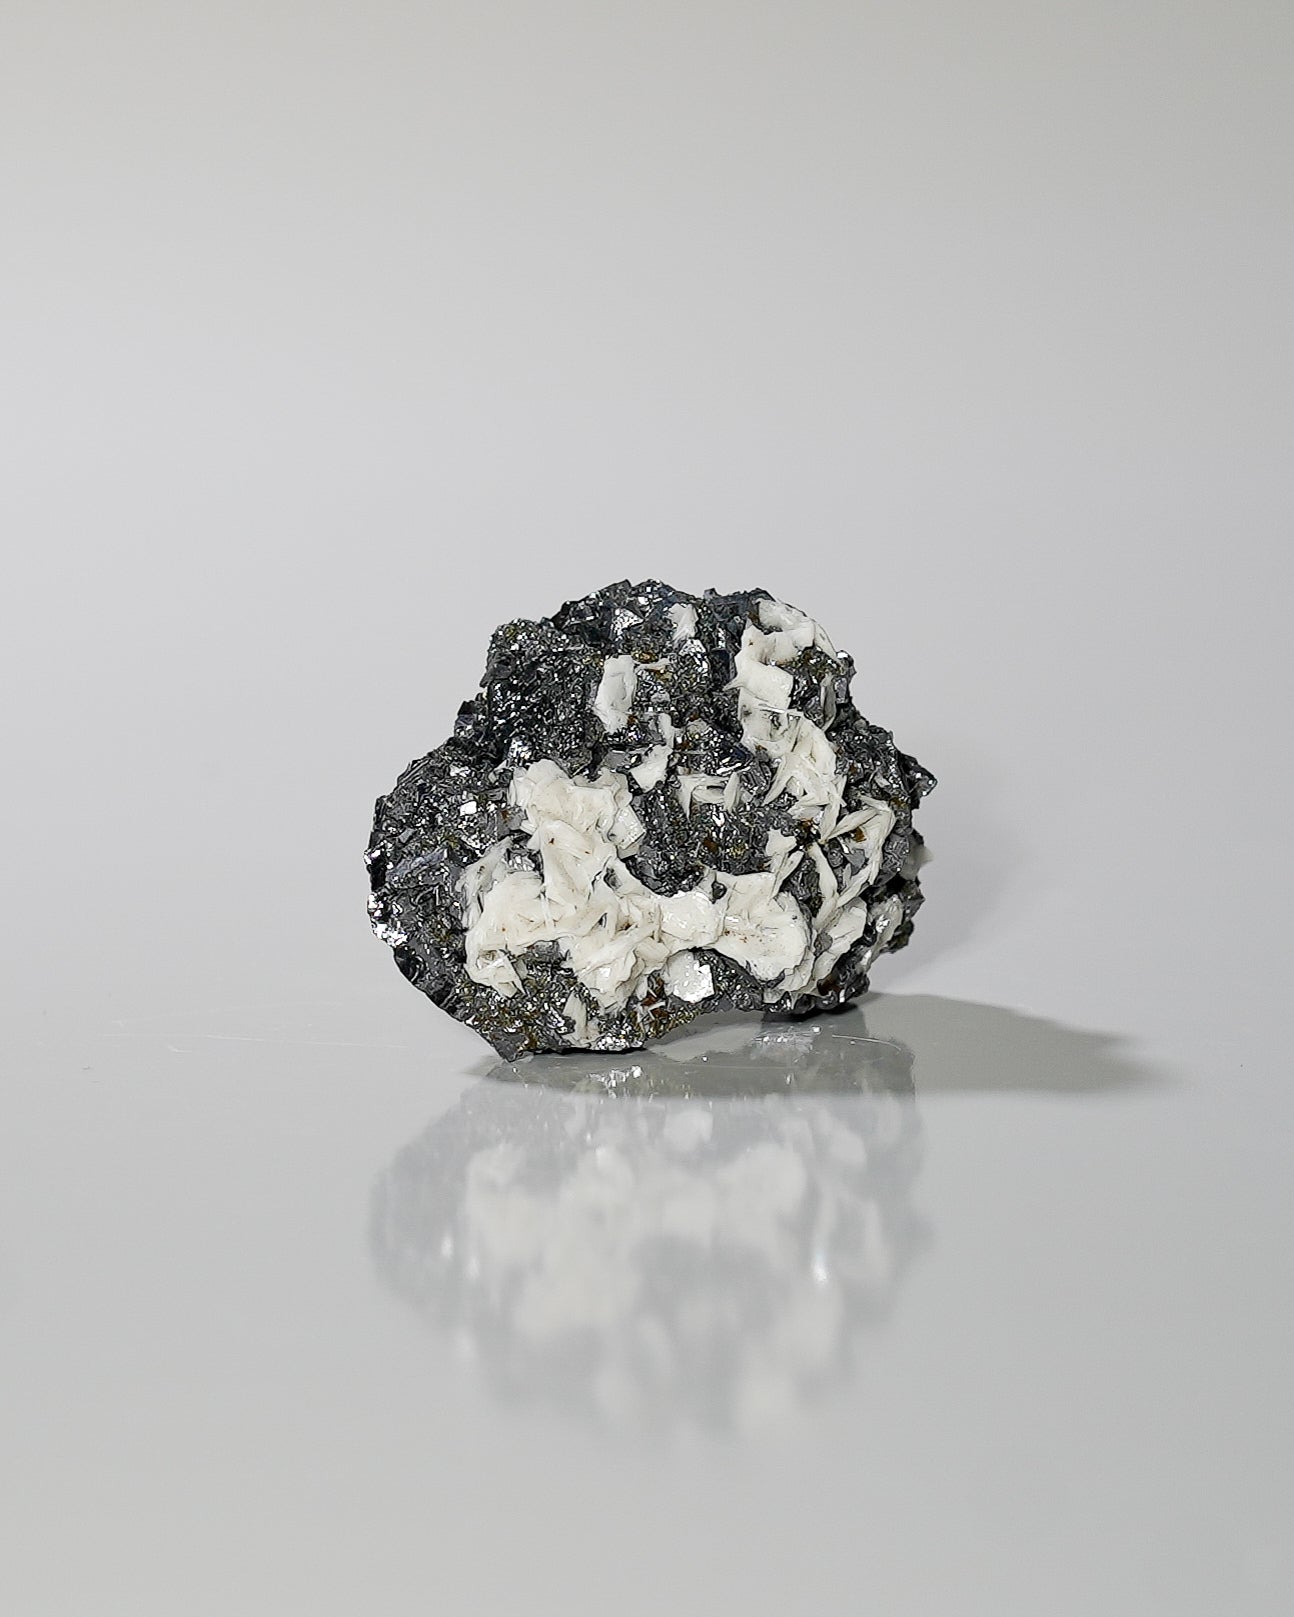 Galena with Barite and Pyrite